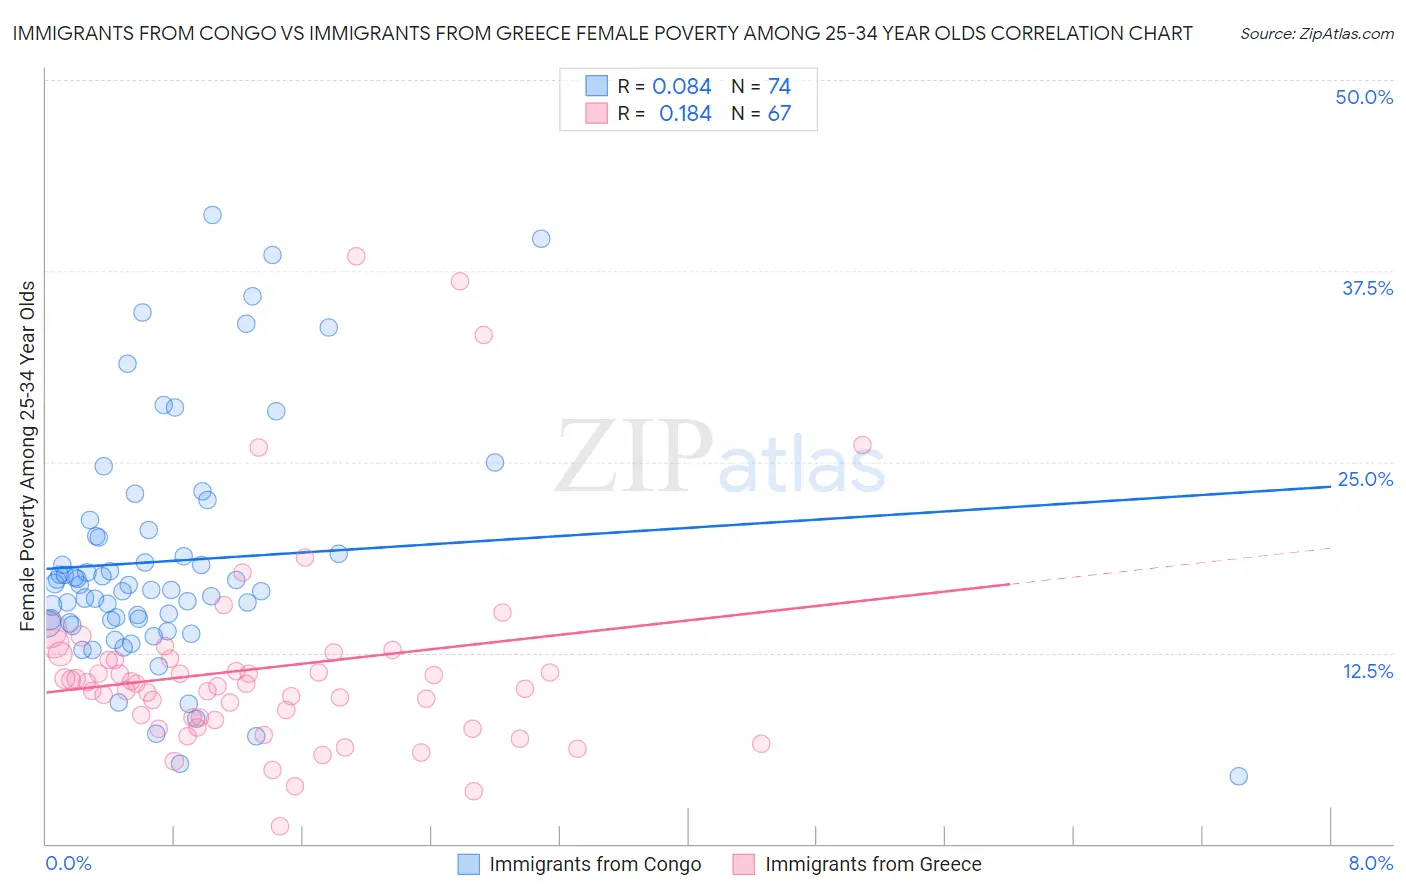 Immigrants from Congo vs Immigrants from Greece Female Poverty Among 25-34 Year Olds